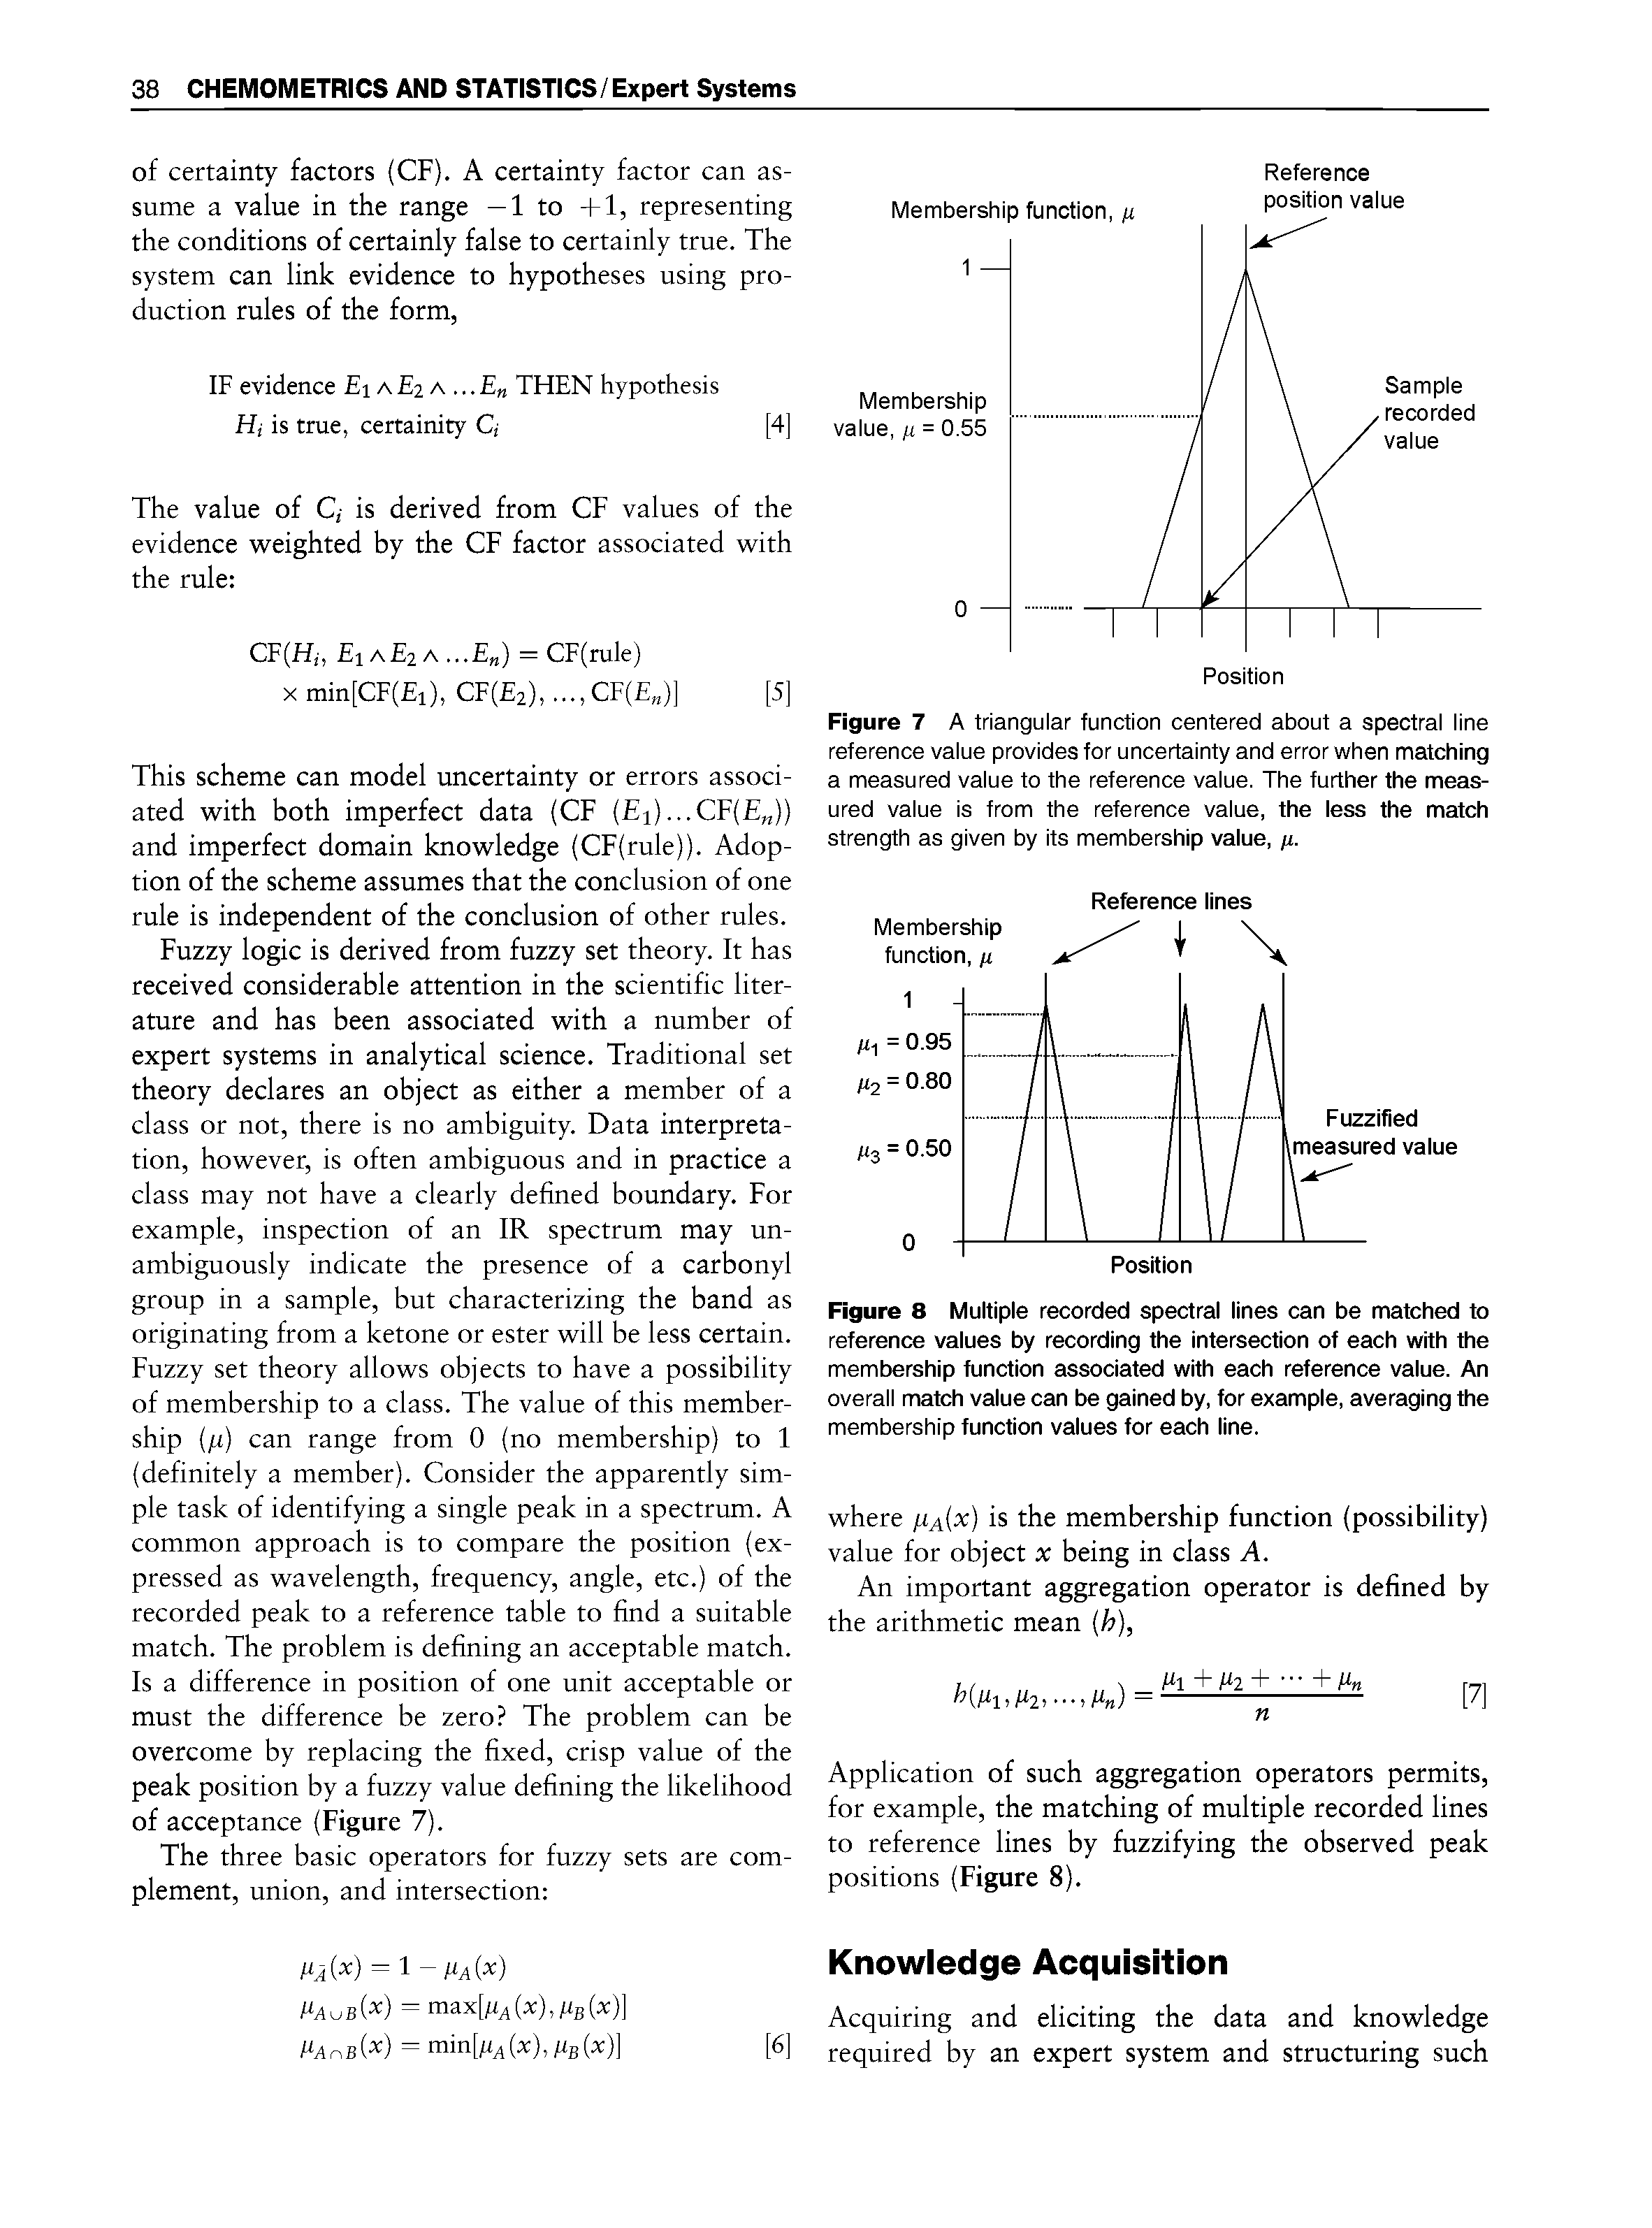 Figure 7 A triangular function centered about a spectral line reference value provides for uncertainty and error when matching a measured value to the reference value. The further the measured value is from the reference value, the less the match strength as given by its membership value, jj..